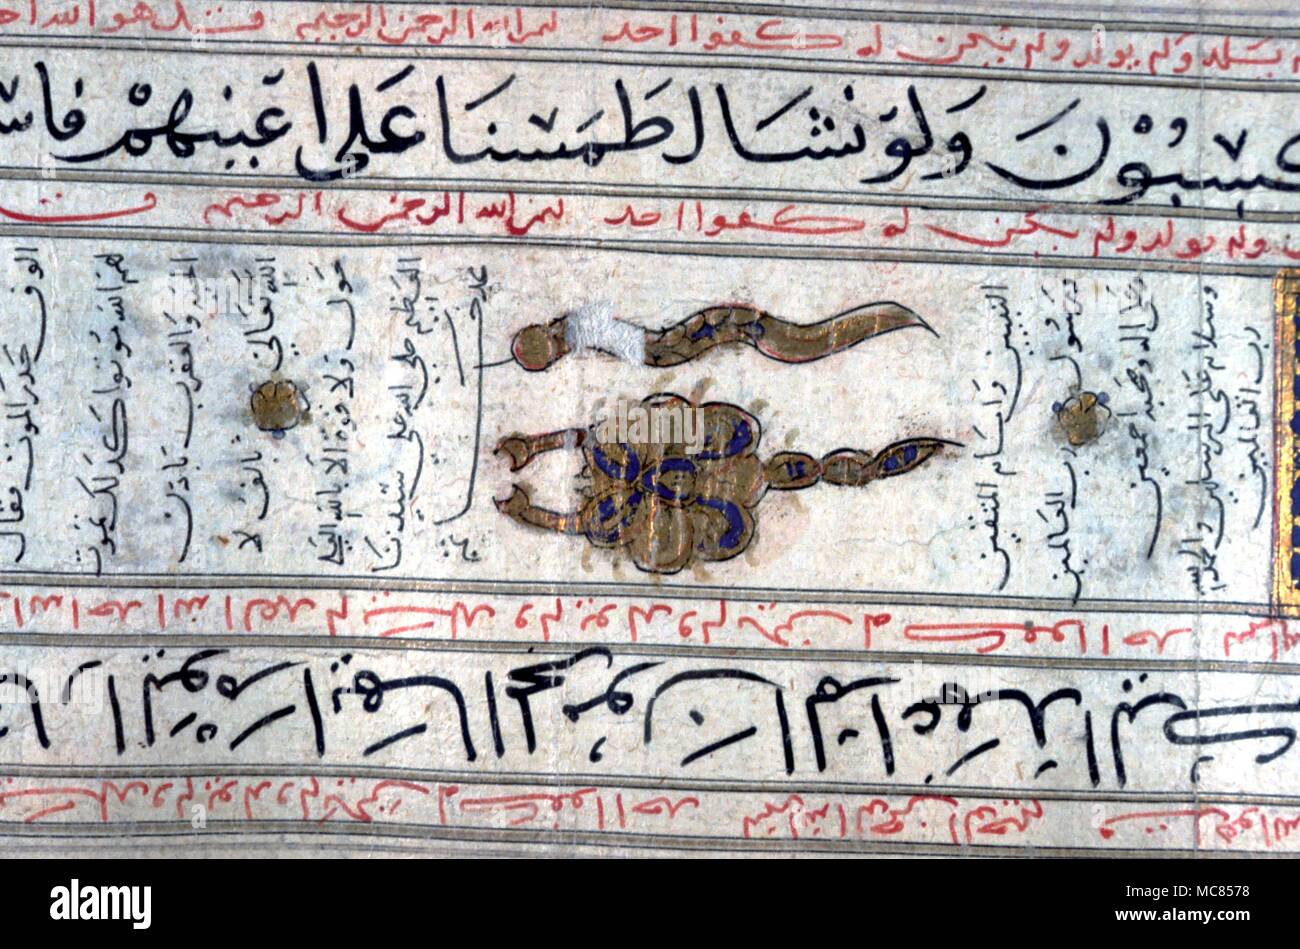 Amulets Magical symbol on an Arabic scroll which is a recipe used as a dispenser of magical amulets and charms against evil. Egyptian 14th century. Dar al Athar al Islamiyyah, Kuwait Stock Photo